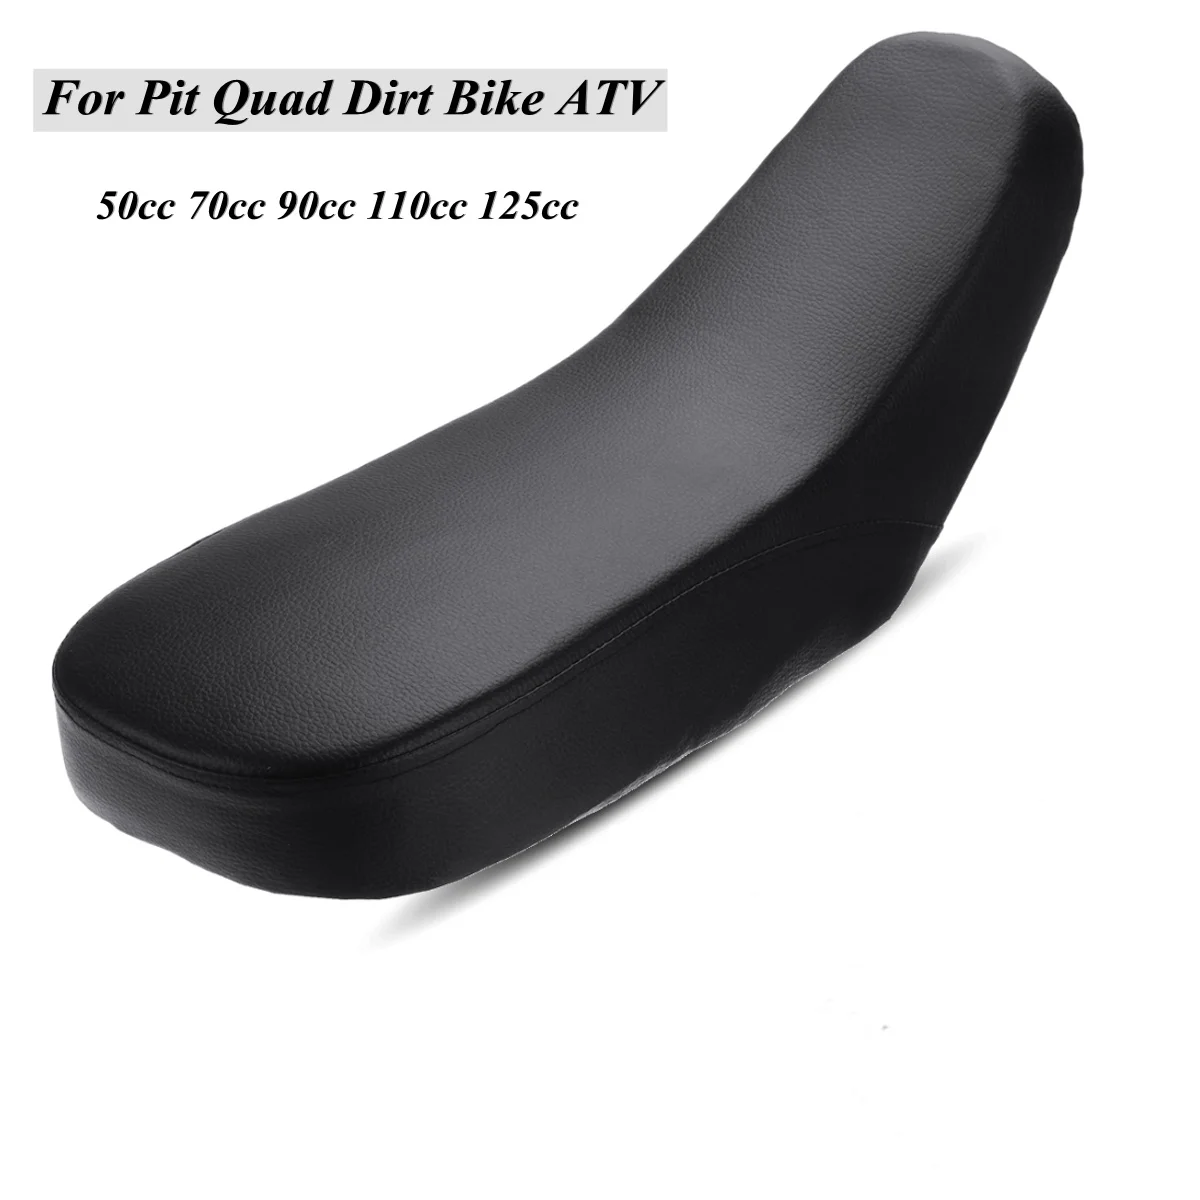 

Motorcycle ATV Scooter Seat Saddle 50cc/70cc/90cc/110cc For Chinese Flying tiger Off-road 4-wheels Quad Dirt Pit Bike